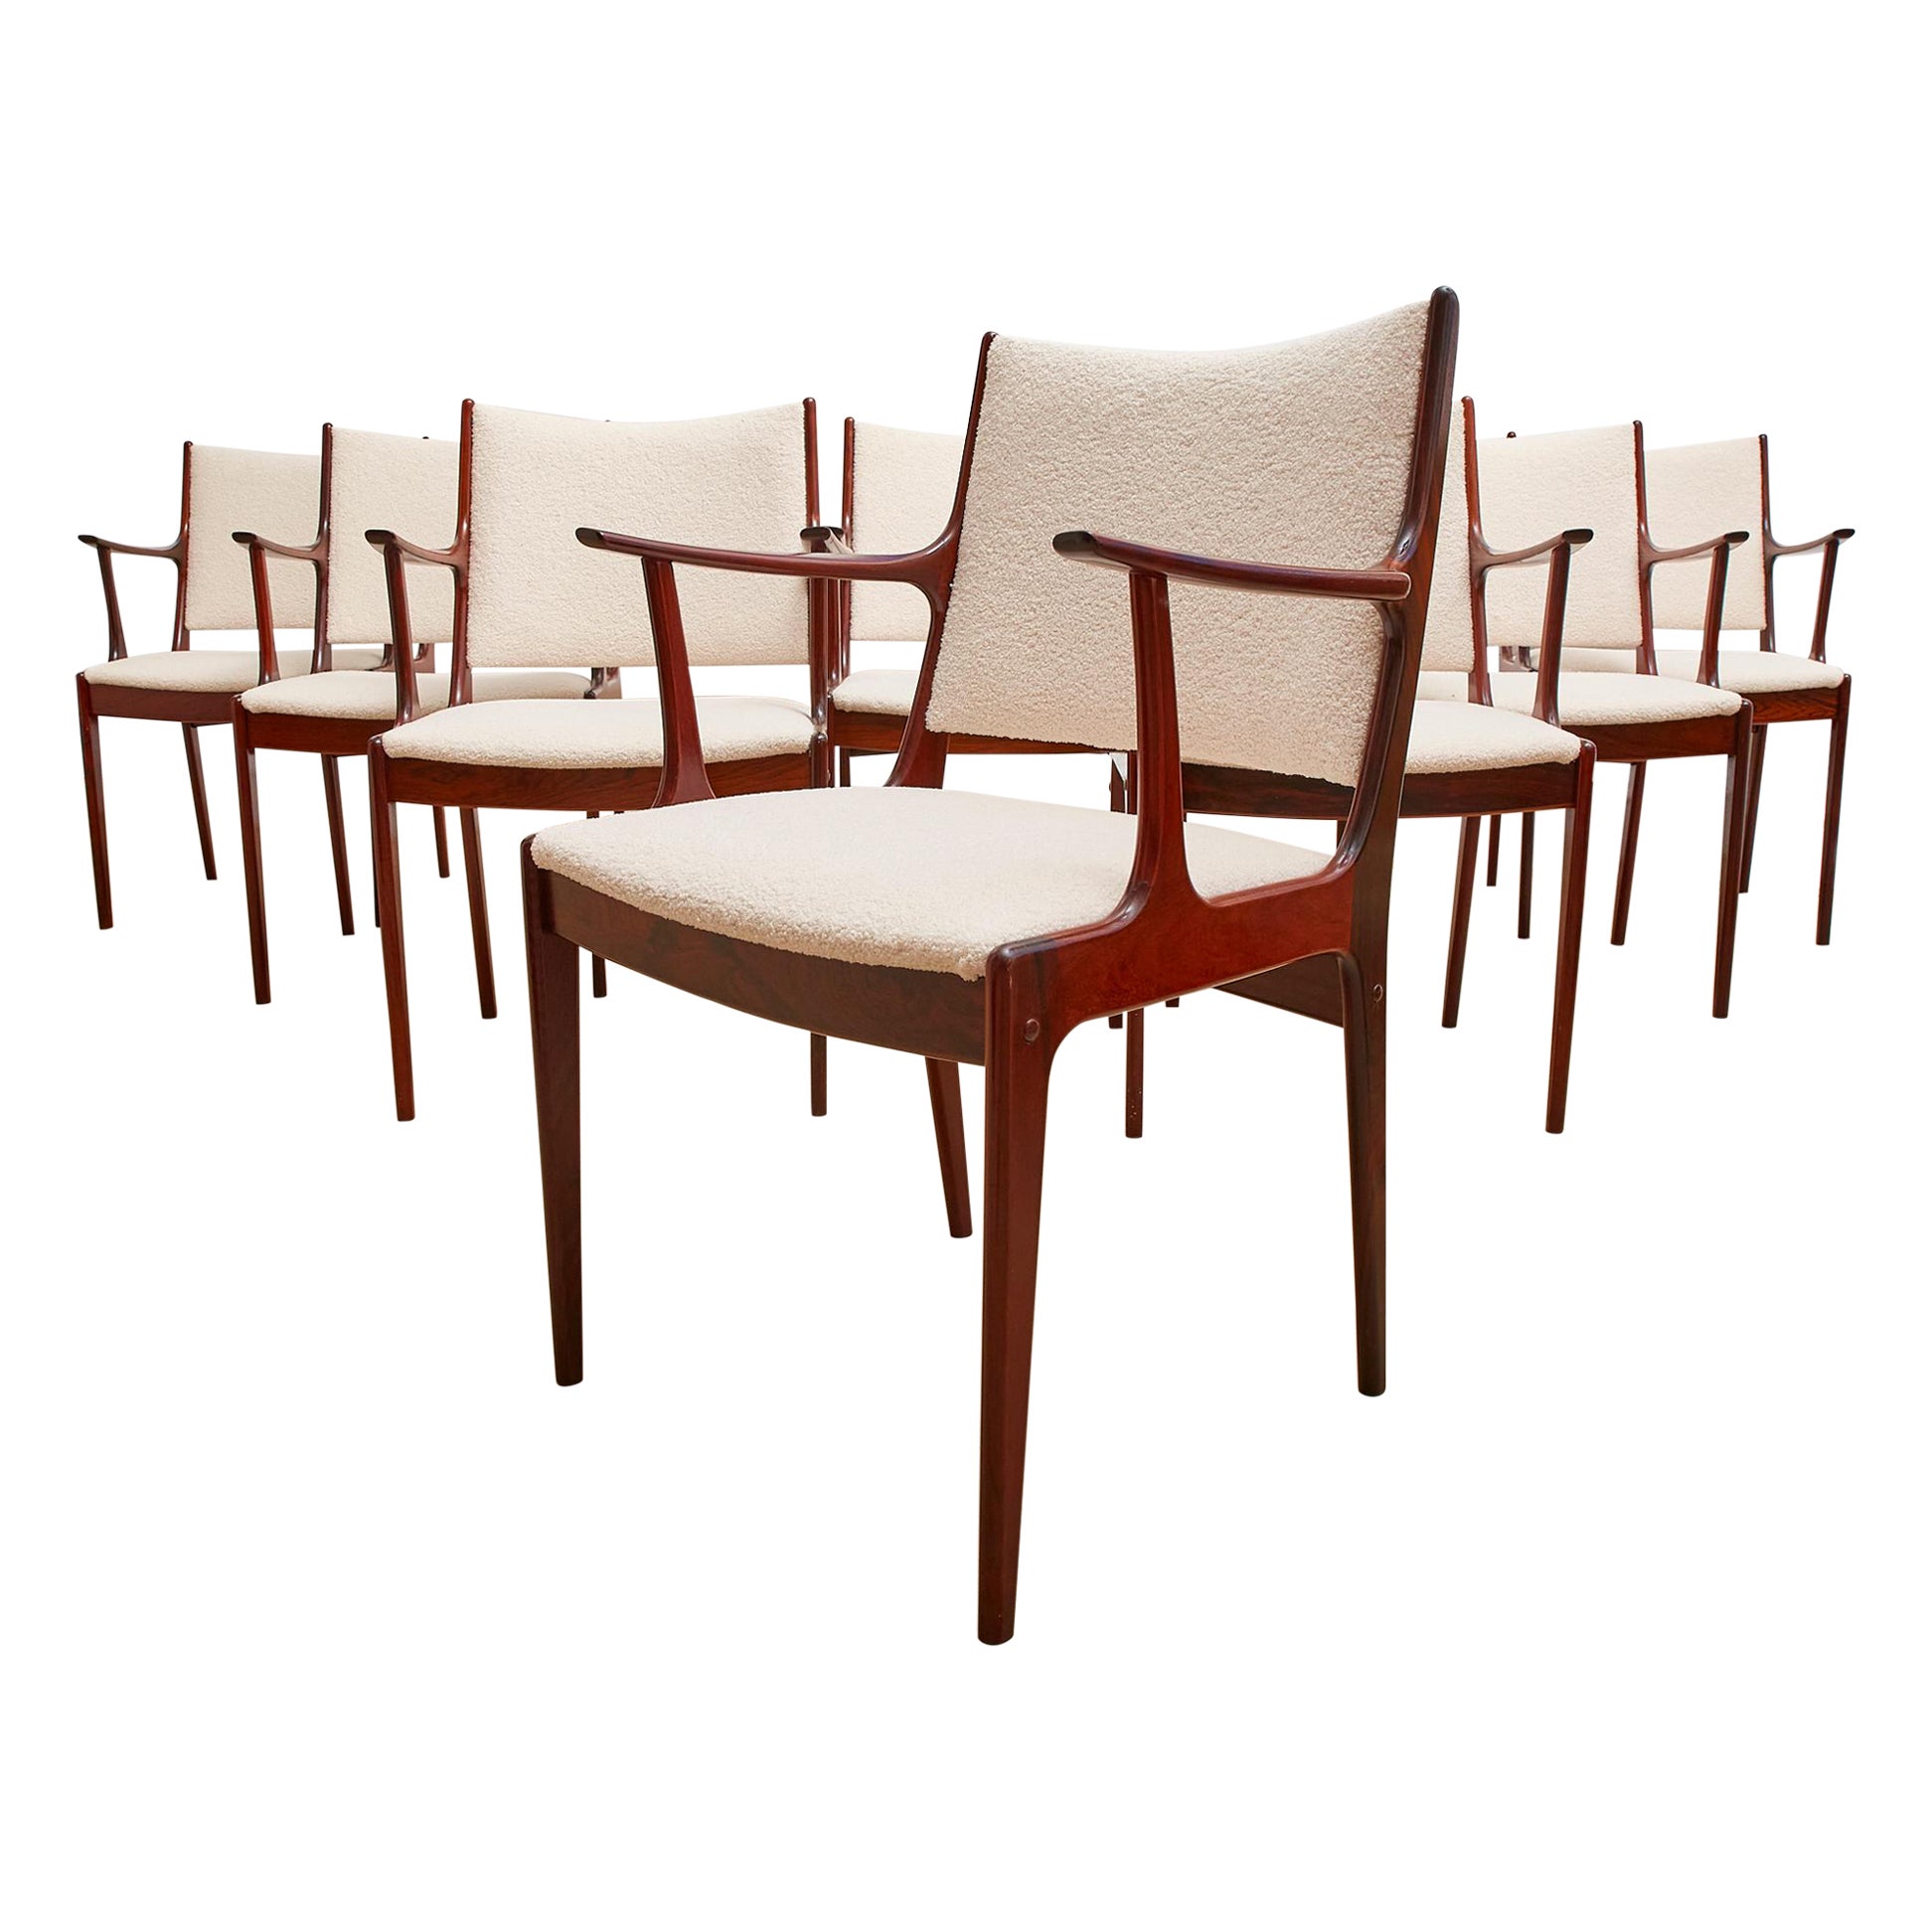 Set of 8 Rosewood Danish dining chairs, 1960s by Johannes Andersen 